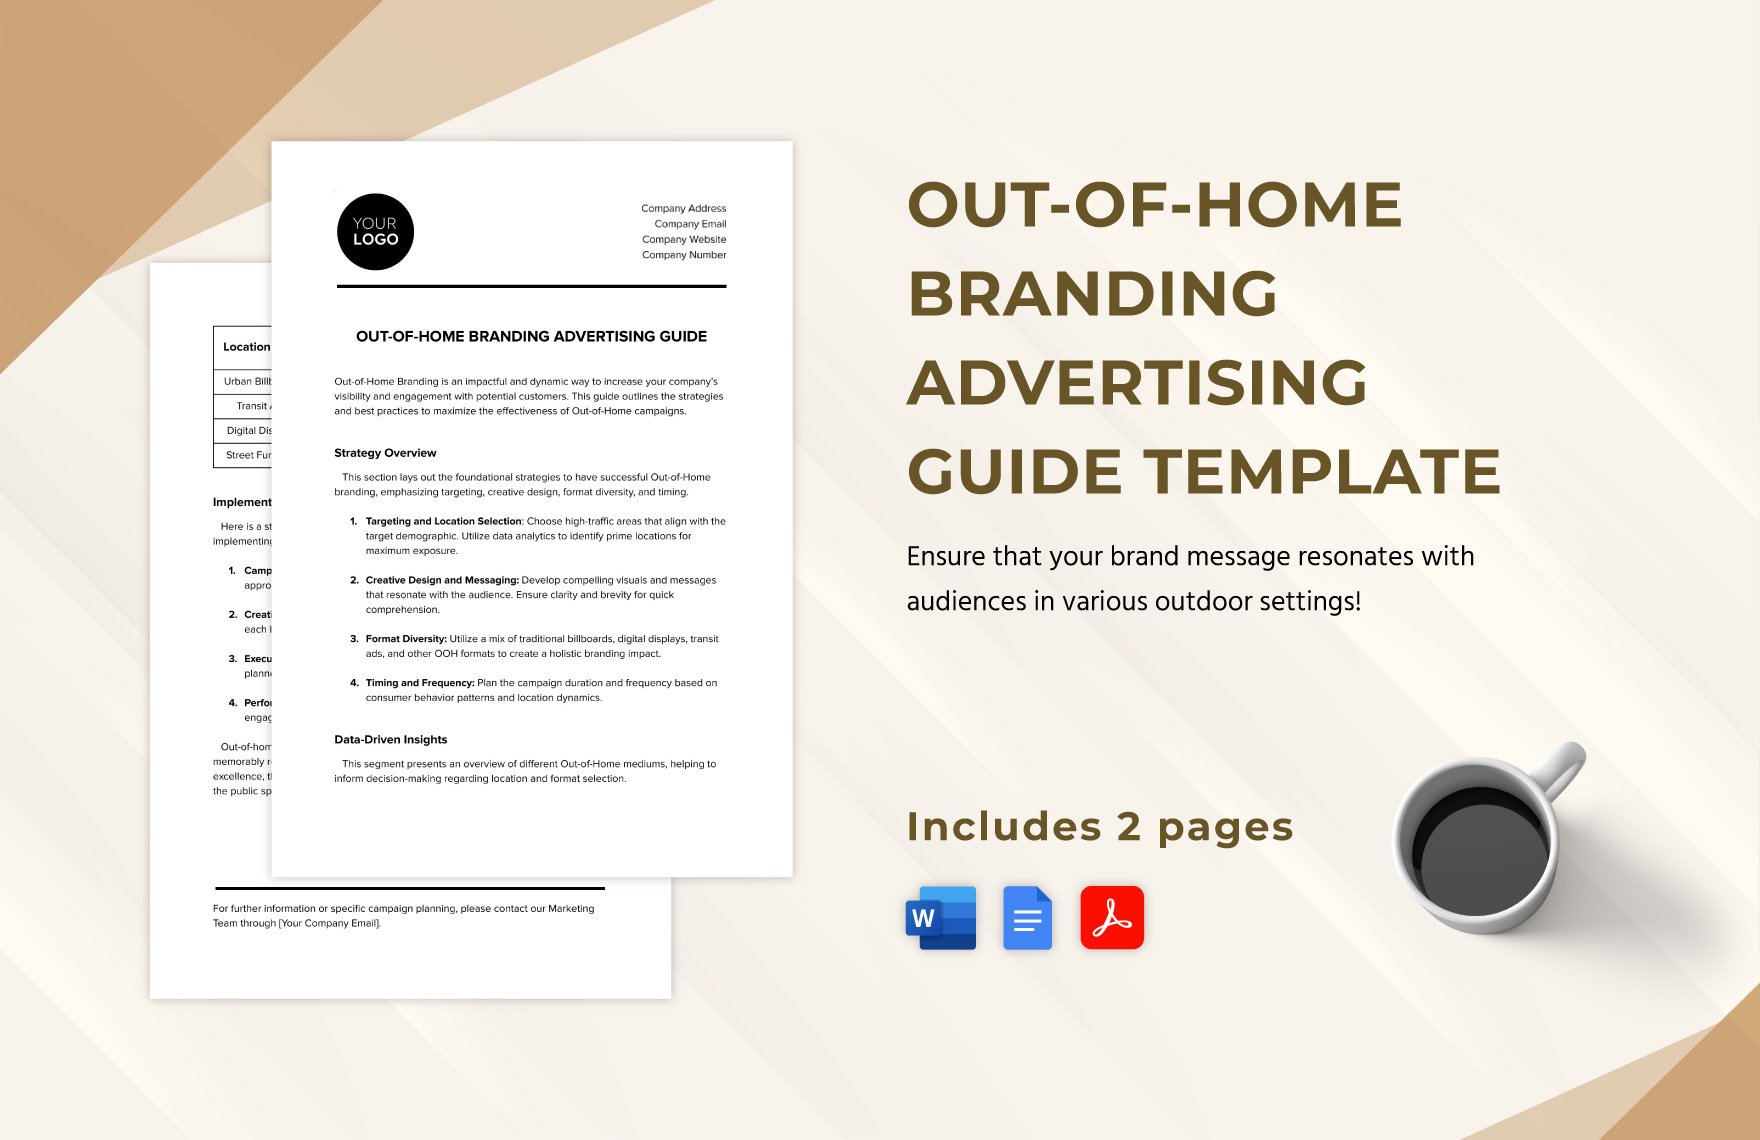 Out-of-Home Branding Advertising Guide Template in Word, Google Docs, PDF